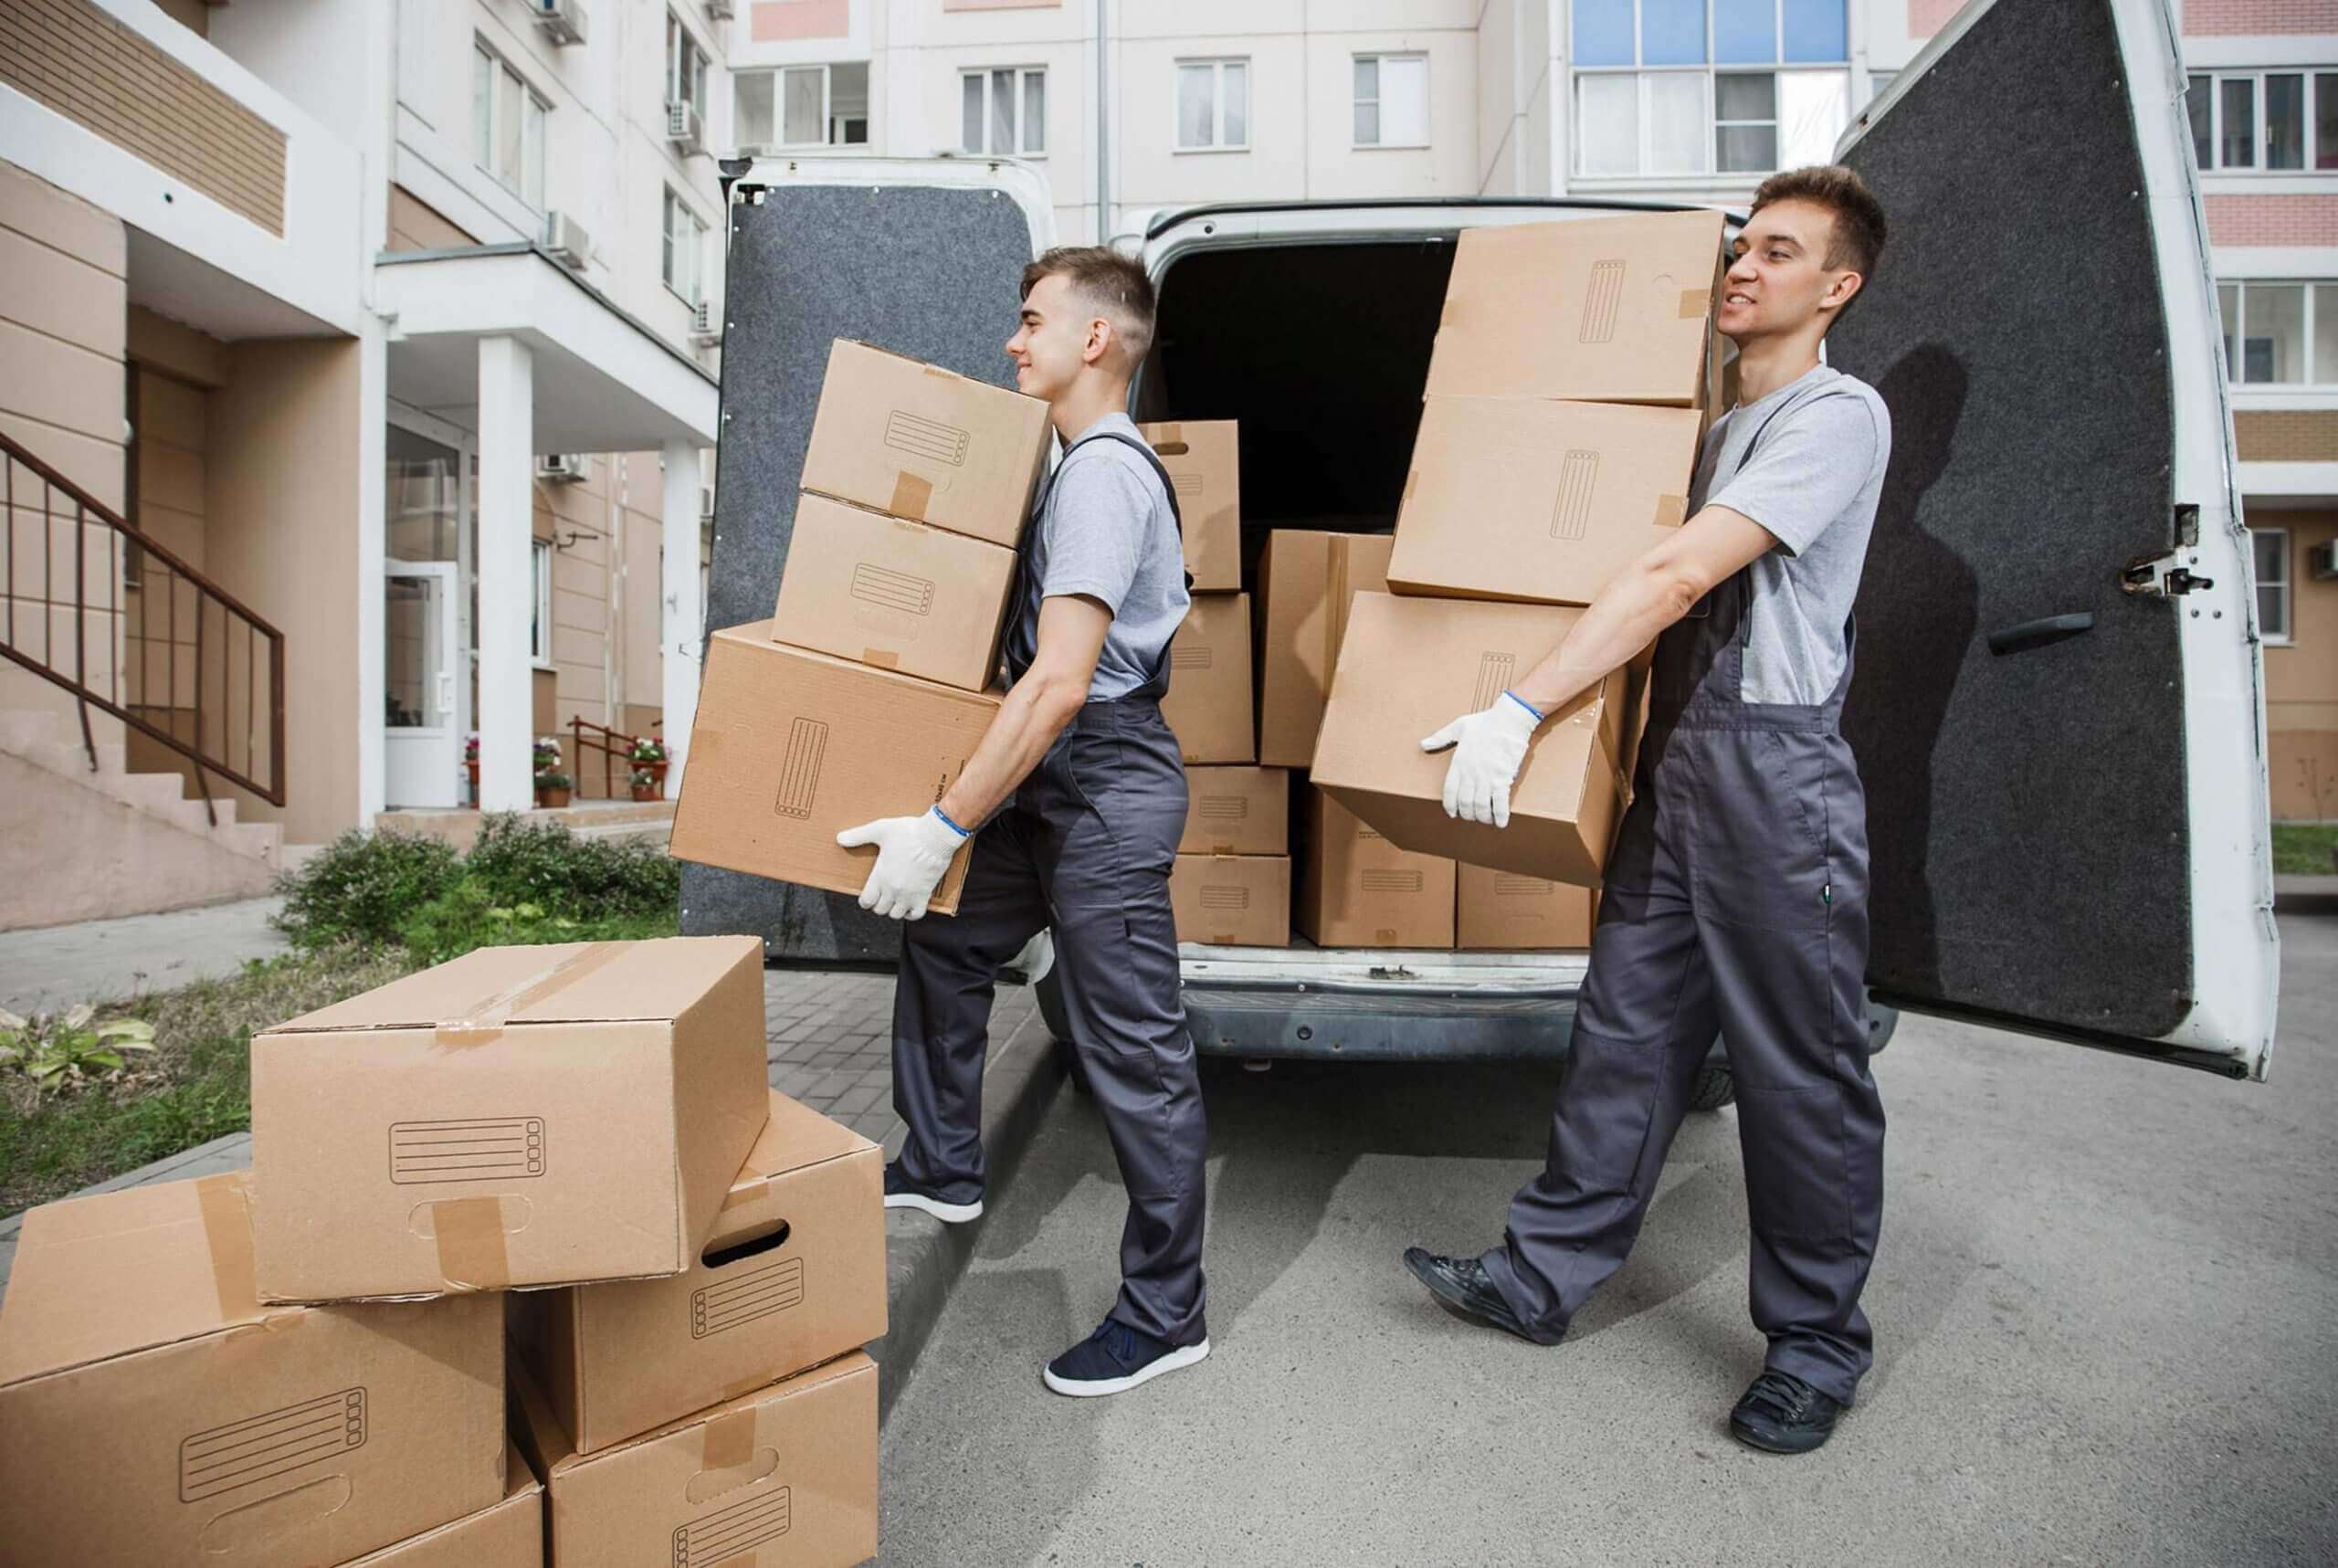 Services Senior Moving Experts arrange and supervise the moving van